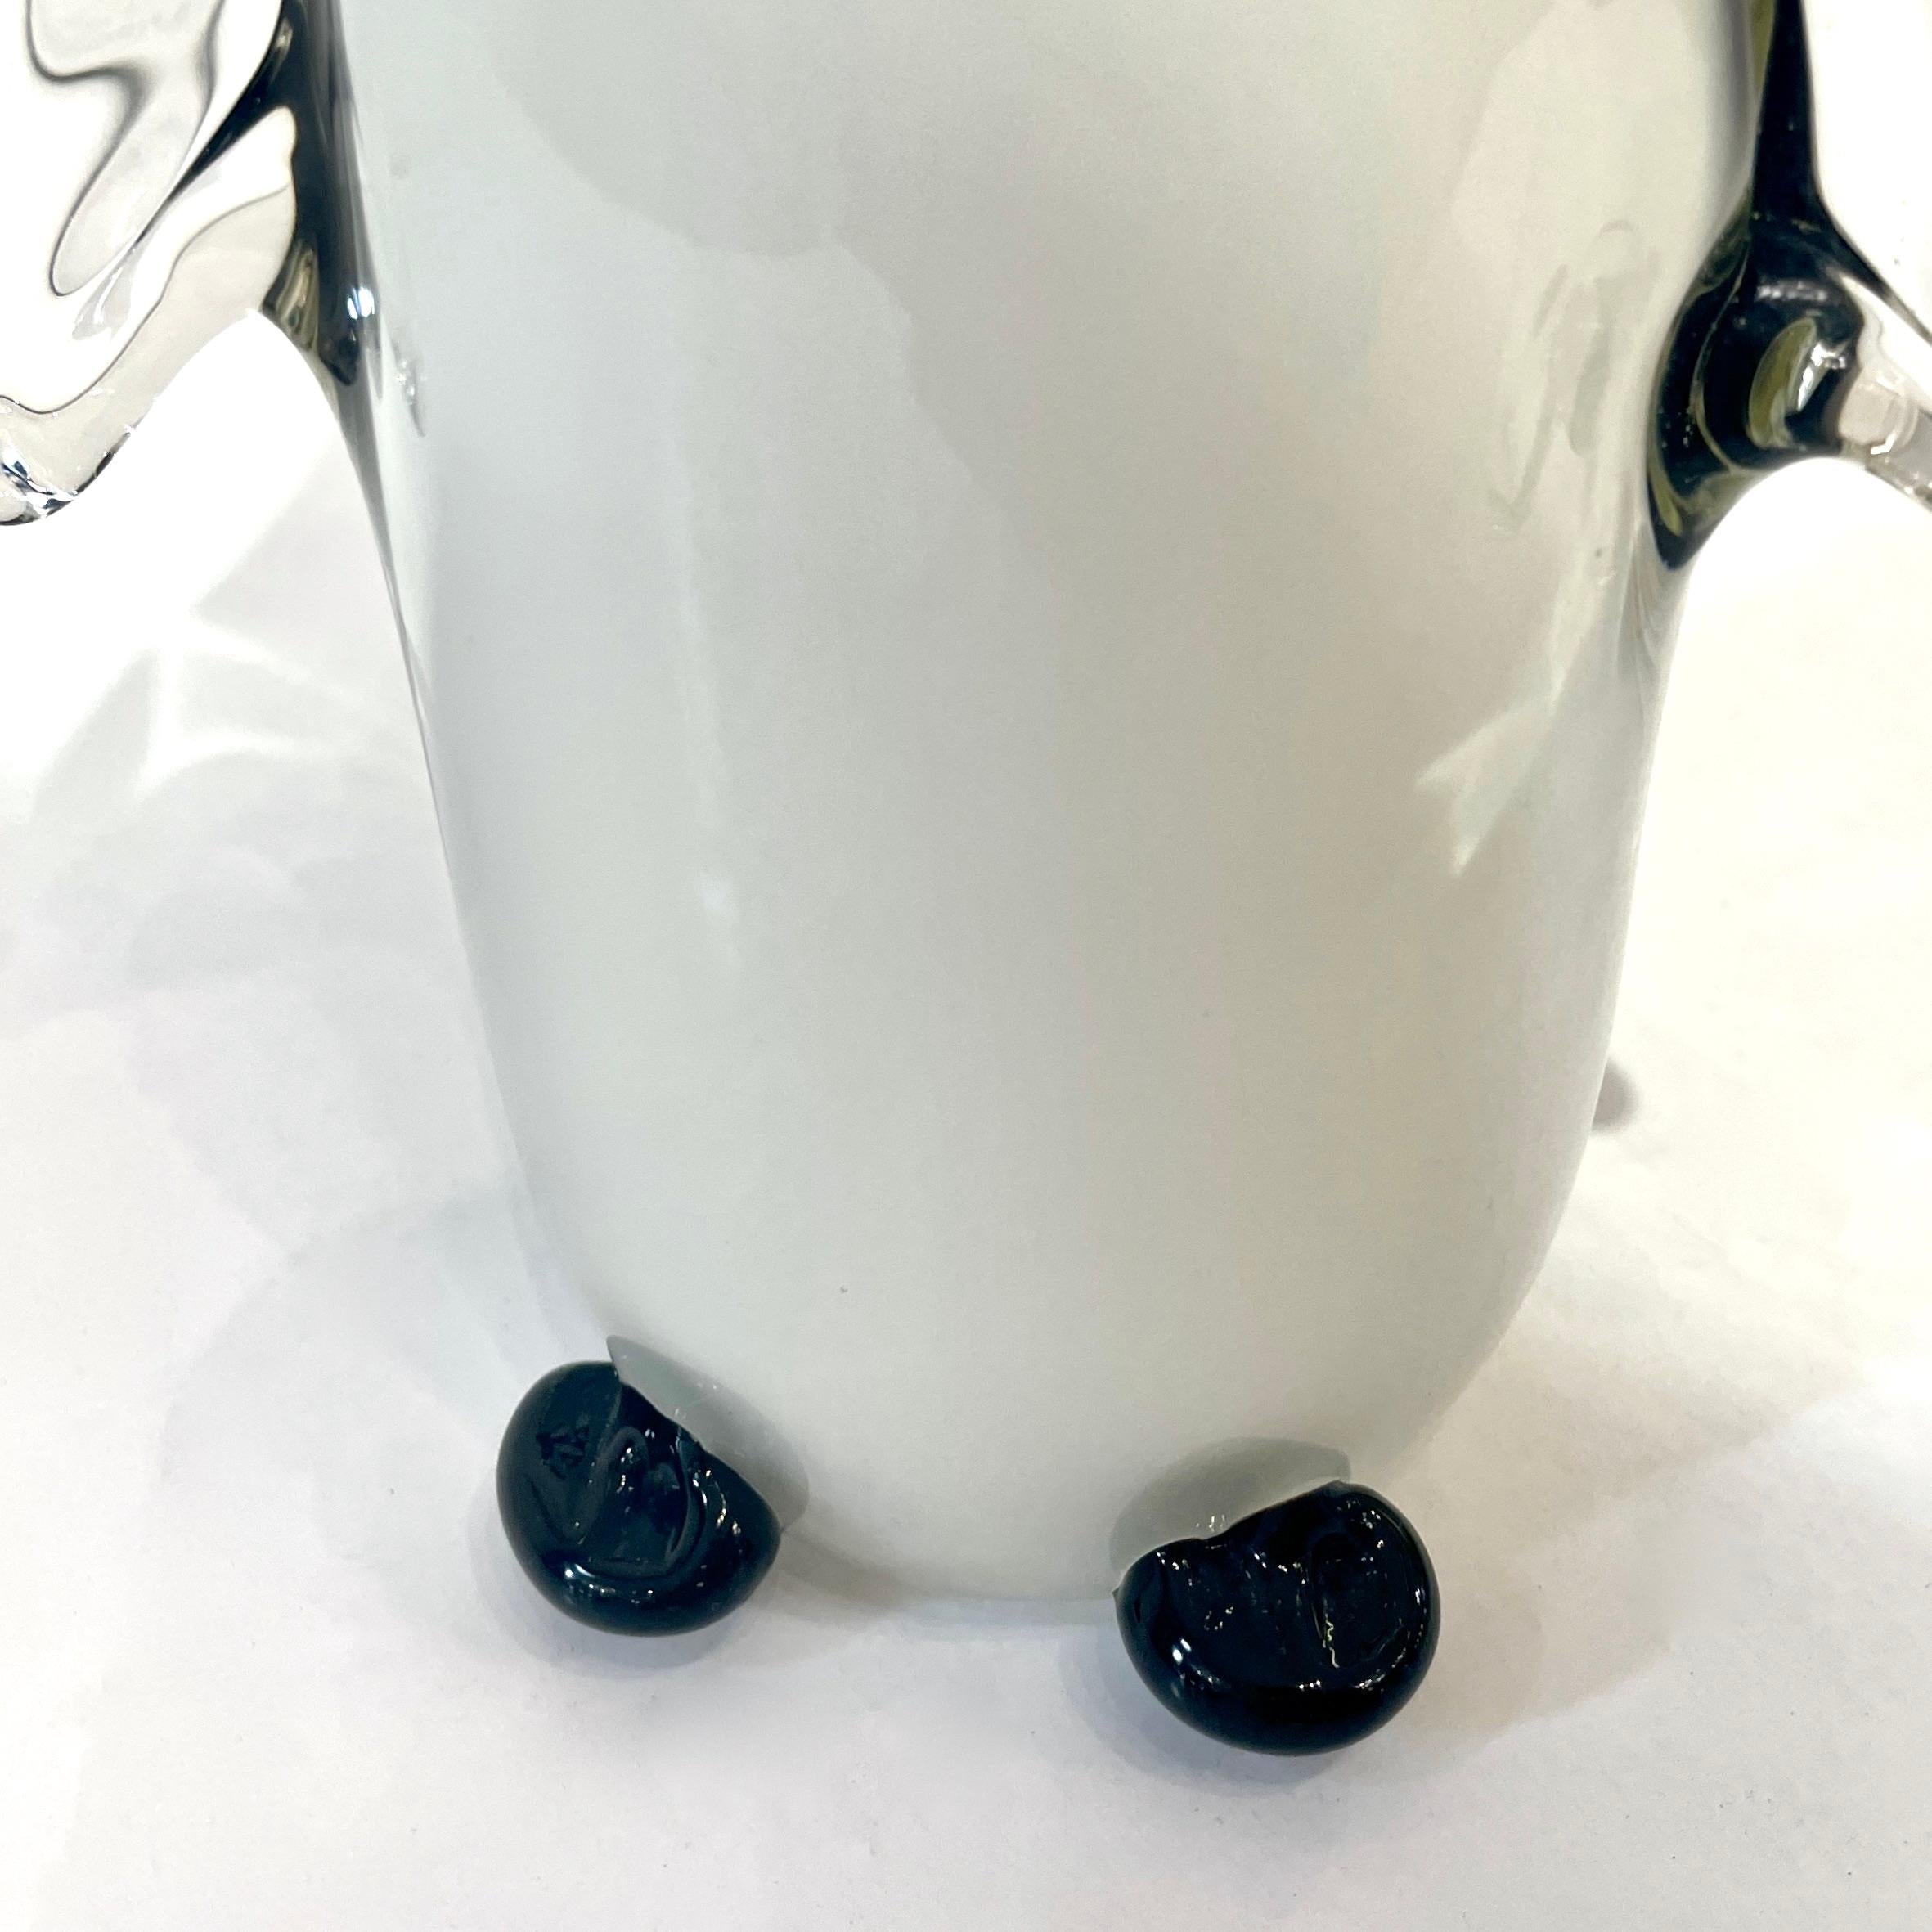 Italian Vintage Black and White Blown Solid Murano Glass Penguin Sculpture For Sale 3